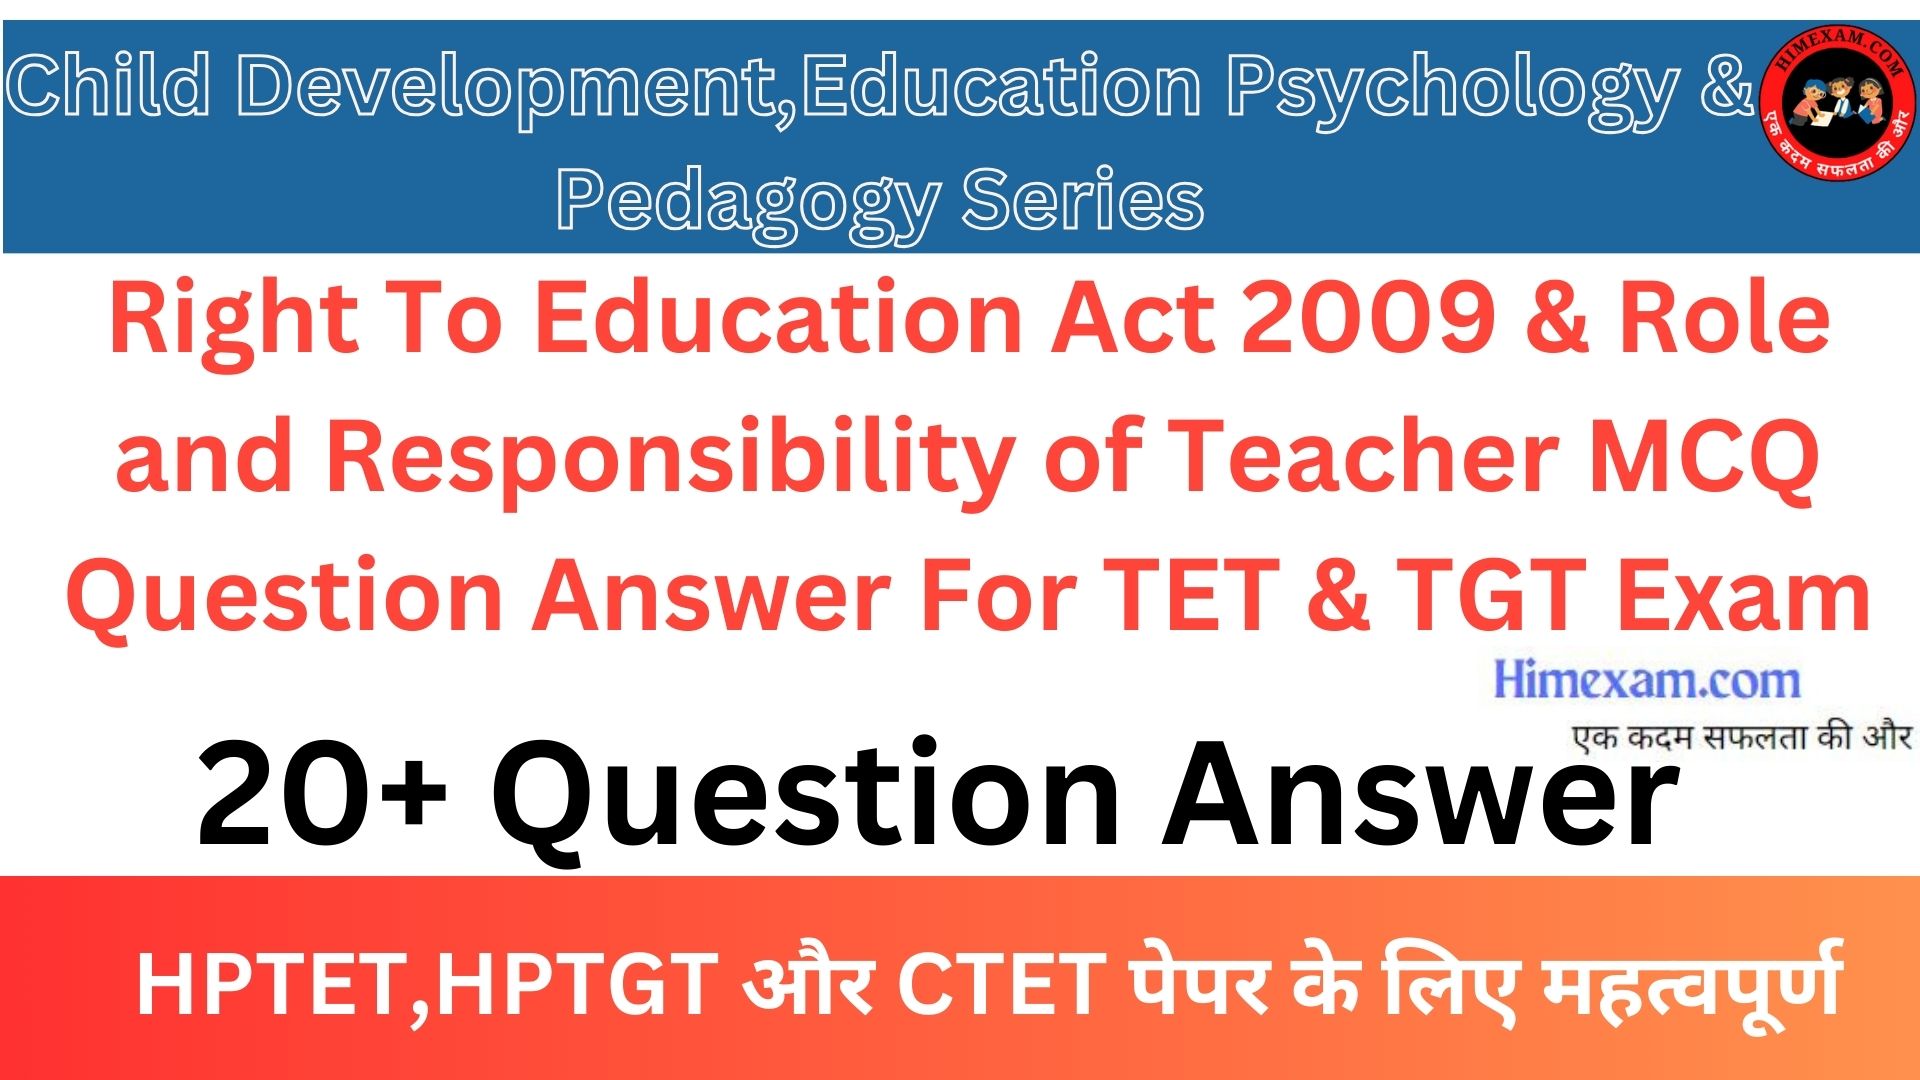 Right To Education Act 2009 & Role and Responsibility of Teacher MCQ Question Answer For TET & TGT Exam